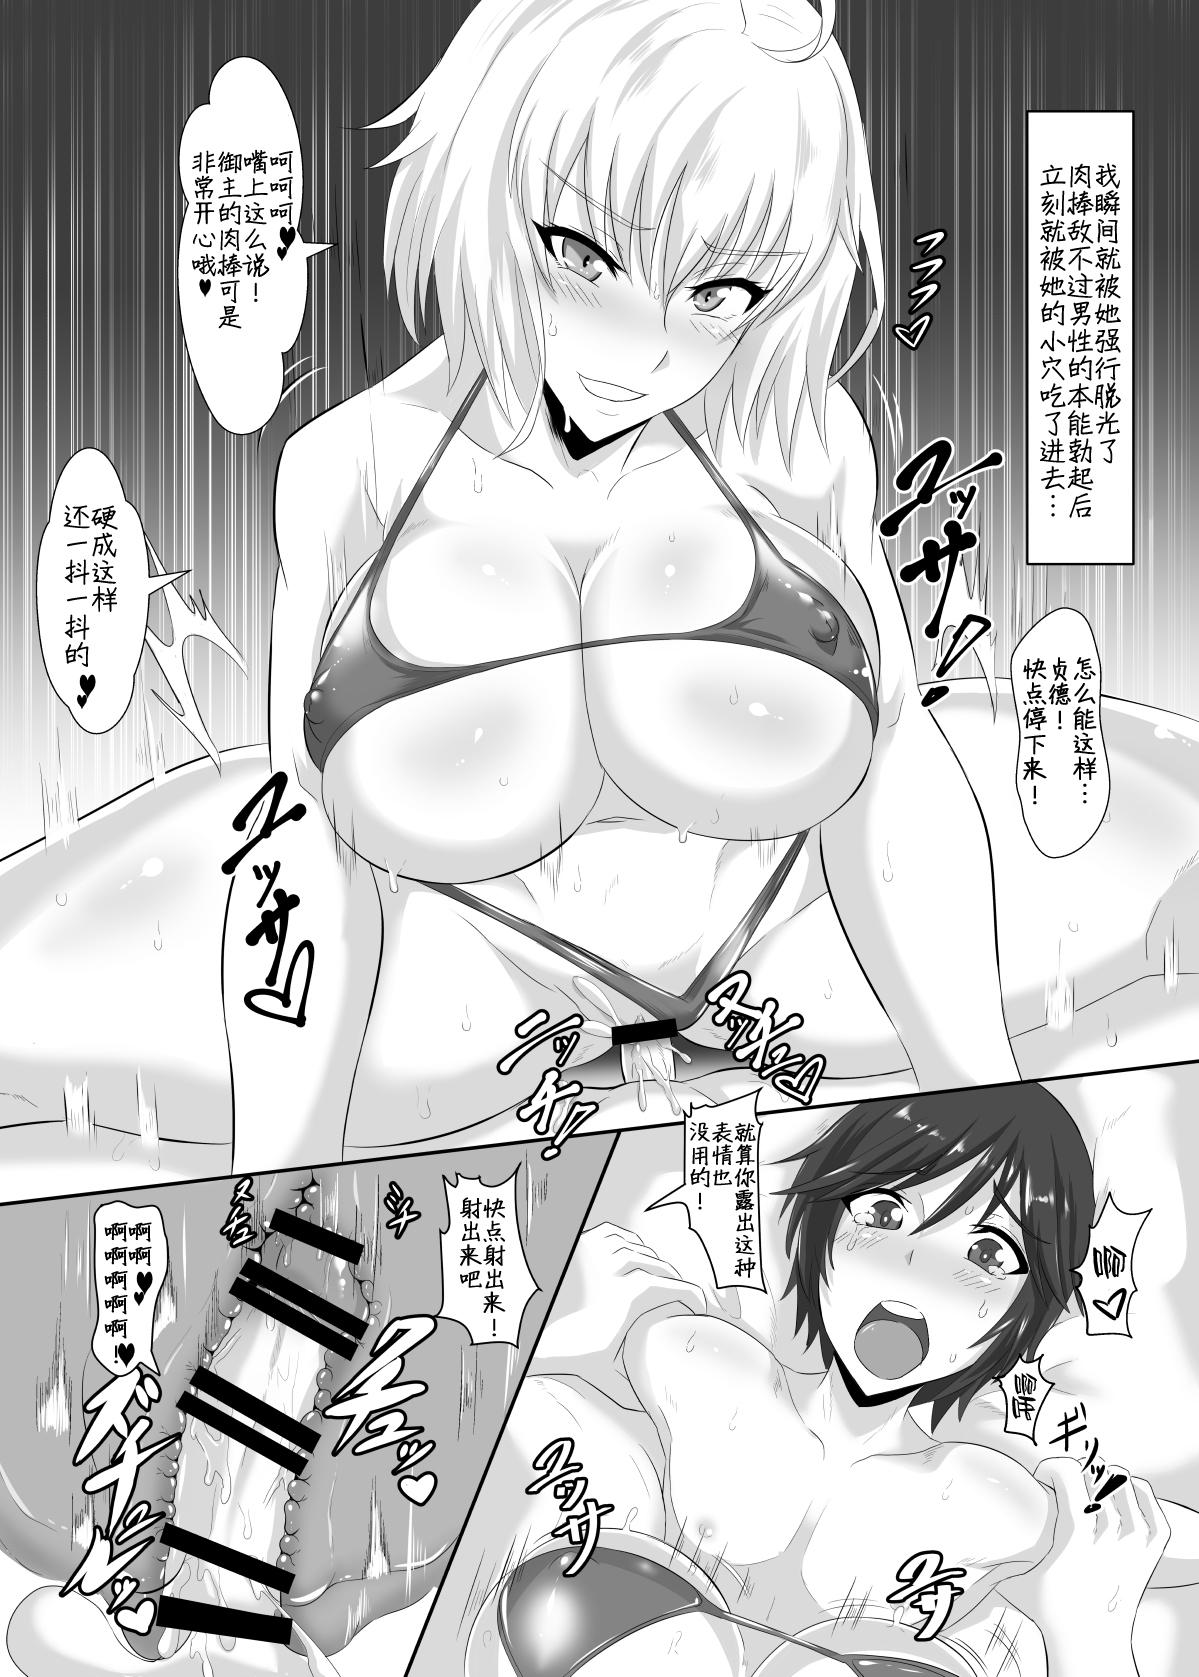 Cameltoe Gehenna 6 - Fate grand order Moaning - Page 4